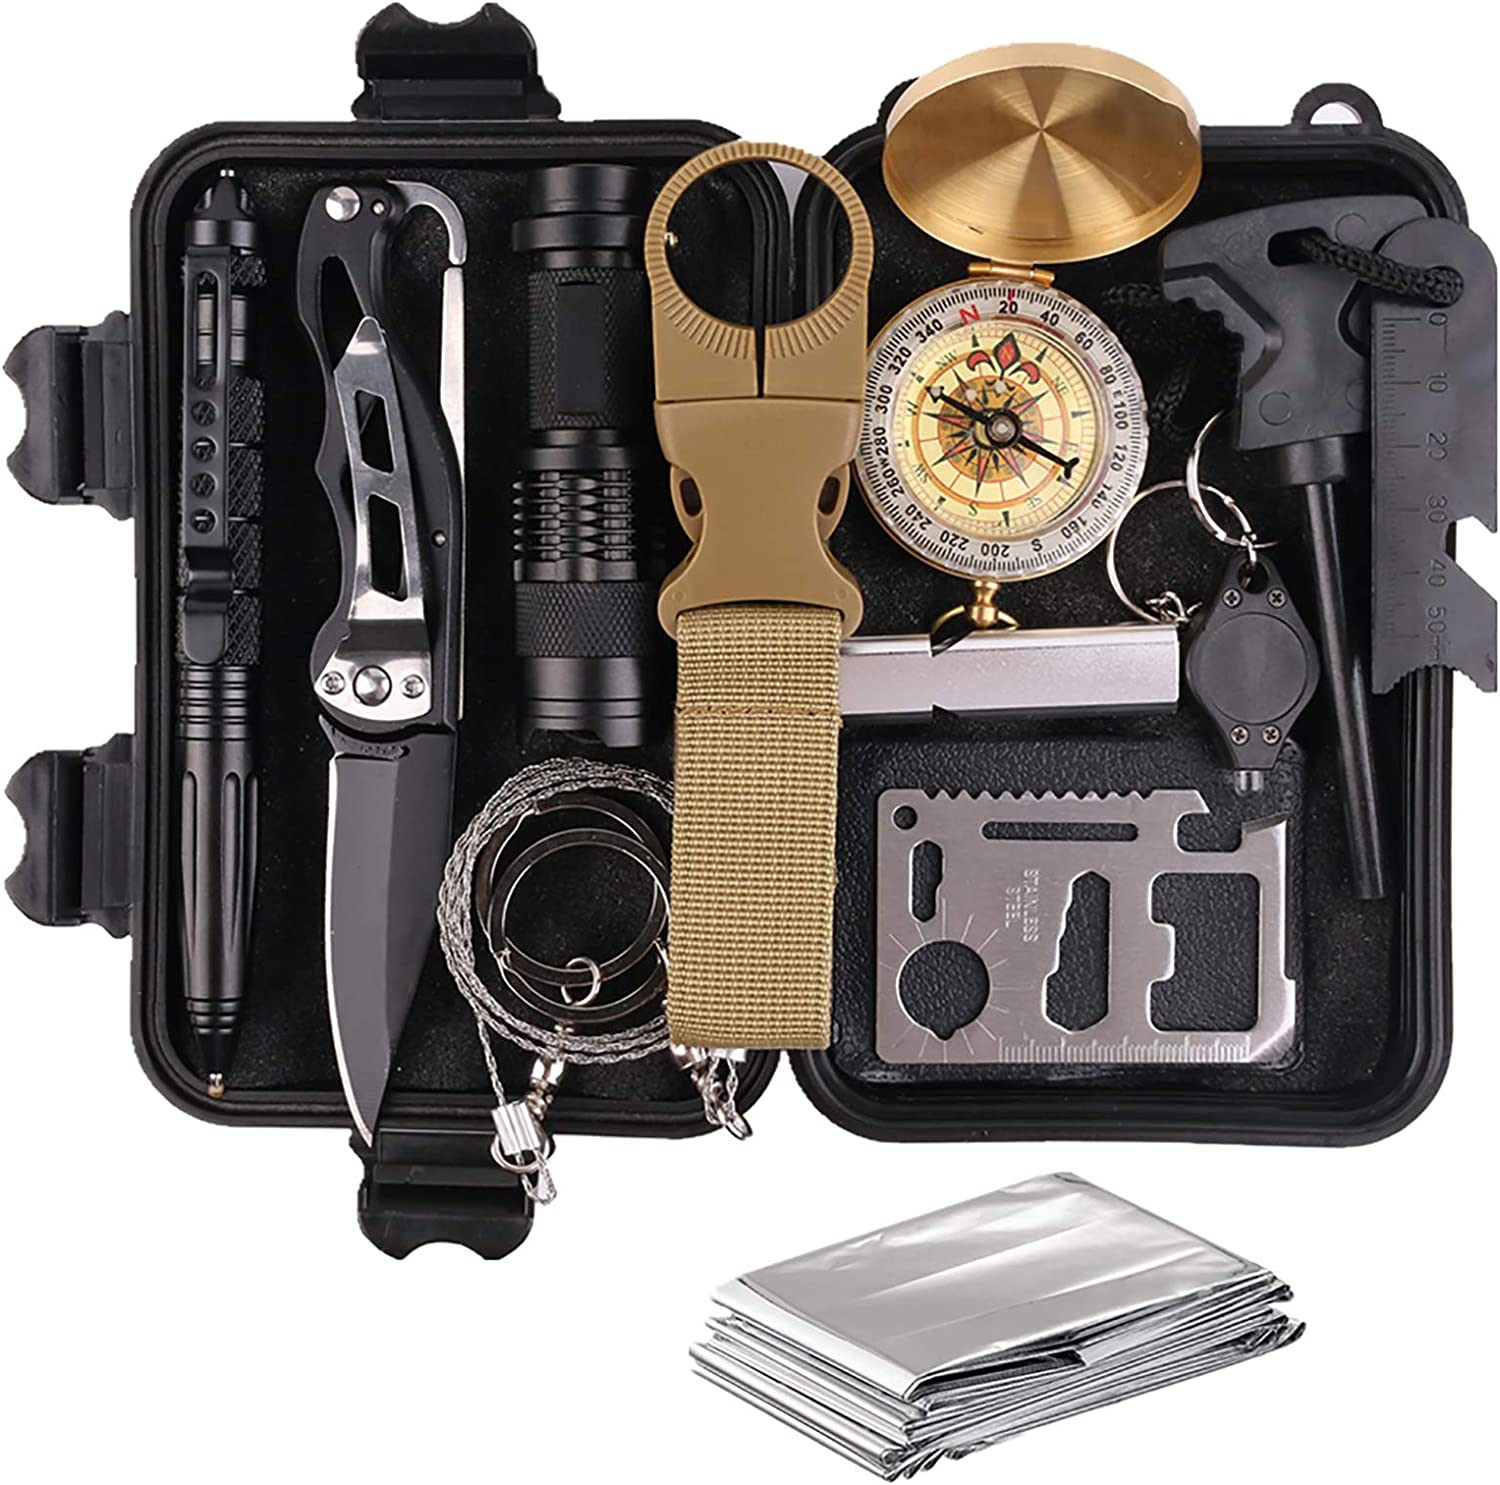 Gifts for Men Husband Dad, Survival Gear and Equipment 14 in 1, Survival Kit, Christmas Stocking Stuffers Birthday Gift Ideas for Him Boyfriend Teenage Boy, Camping Hunting Fishing Accessories